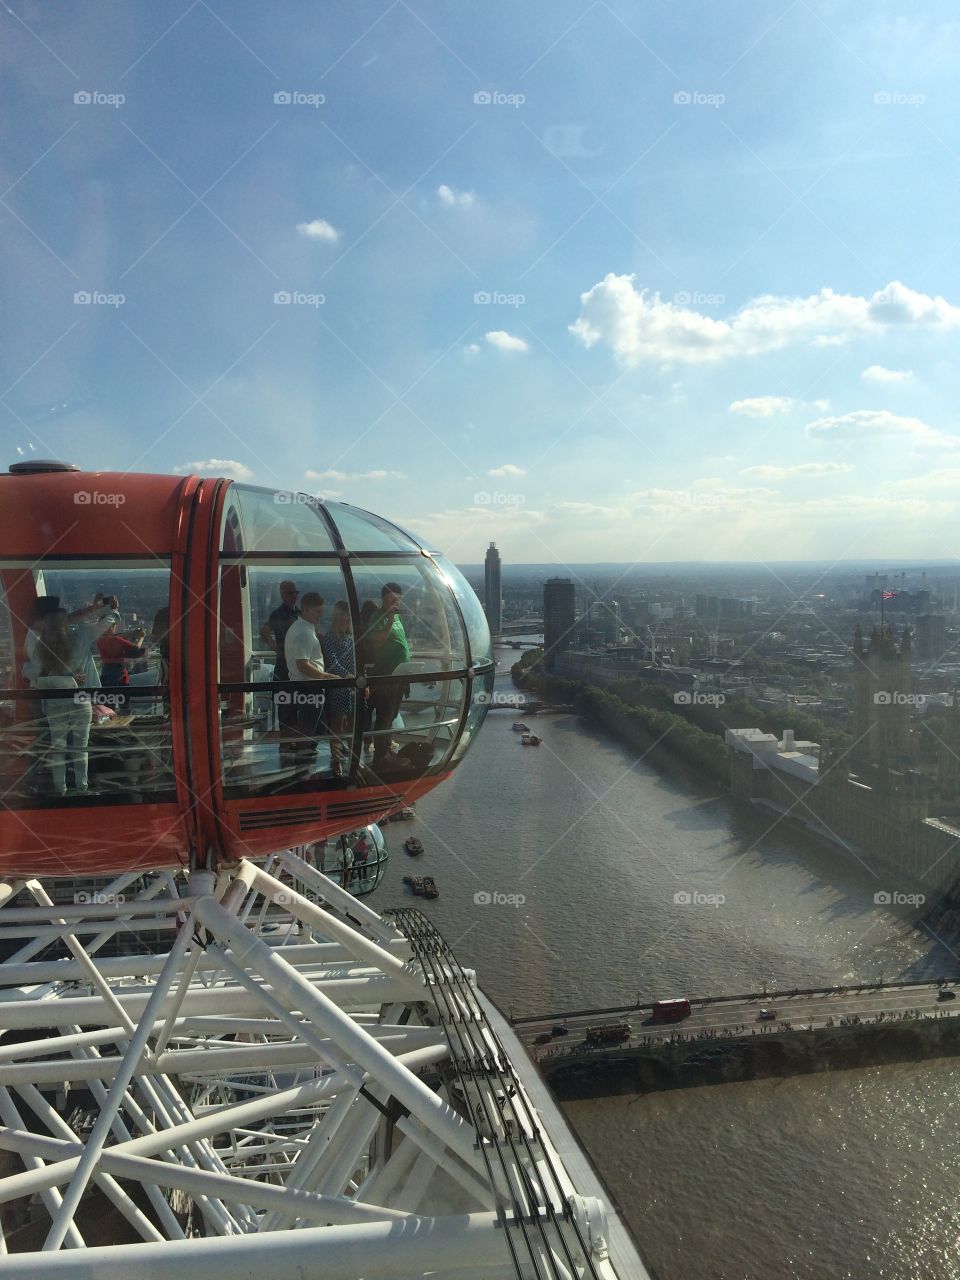 On top of the London Eye 